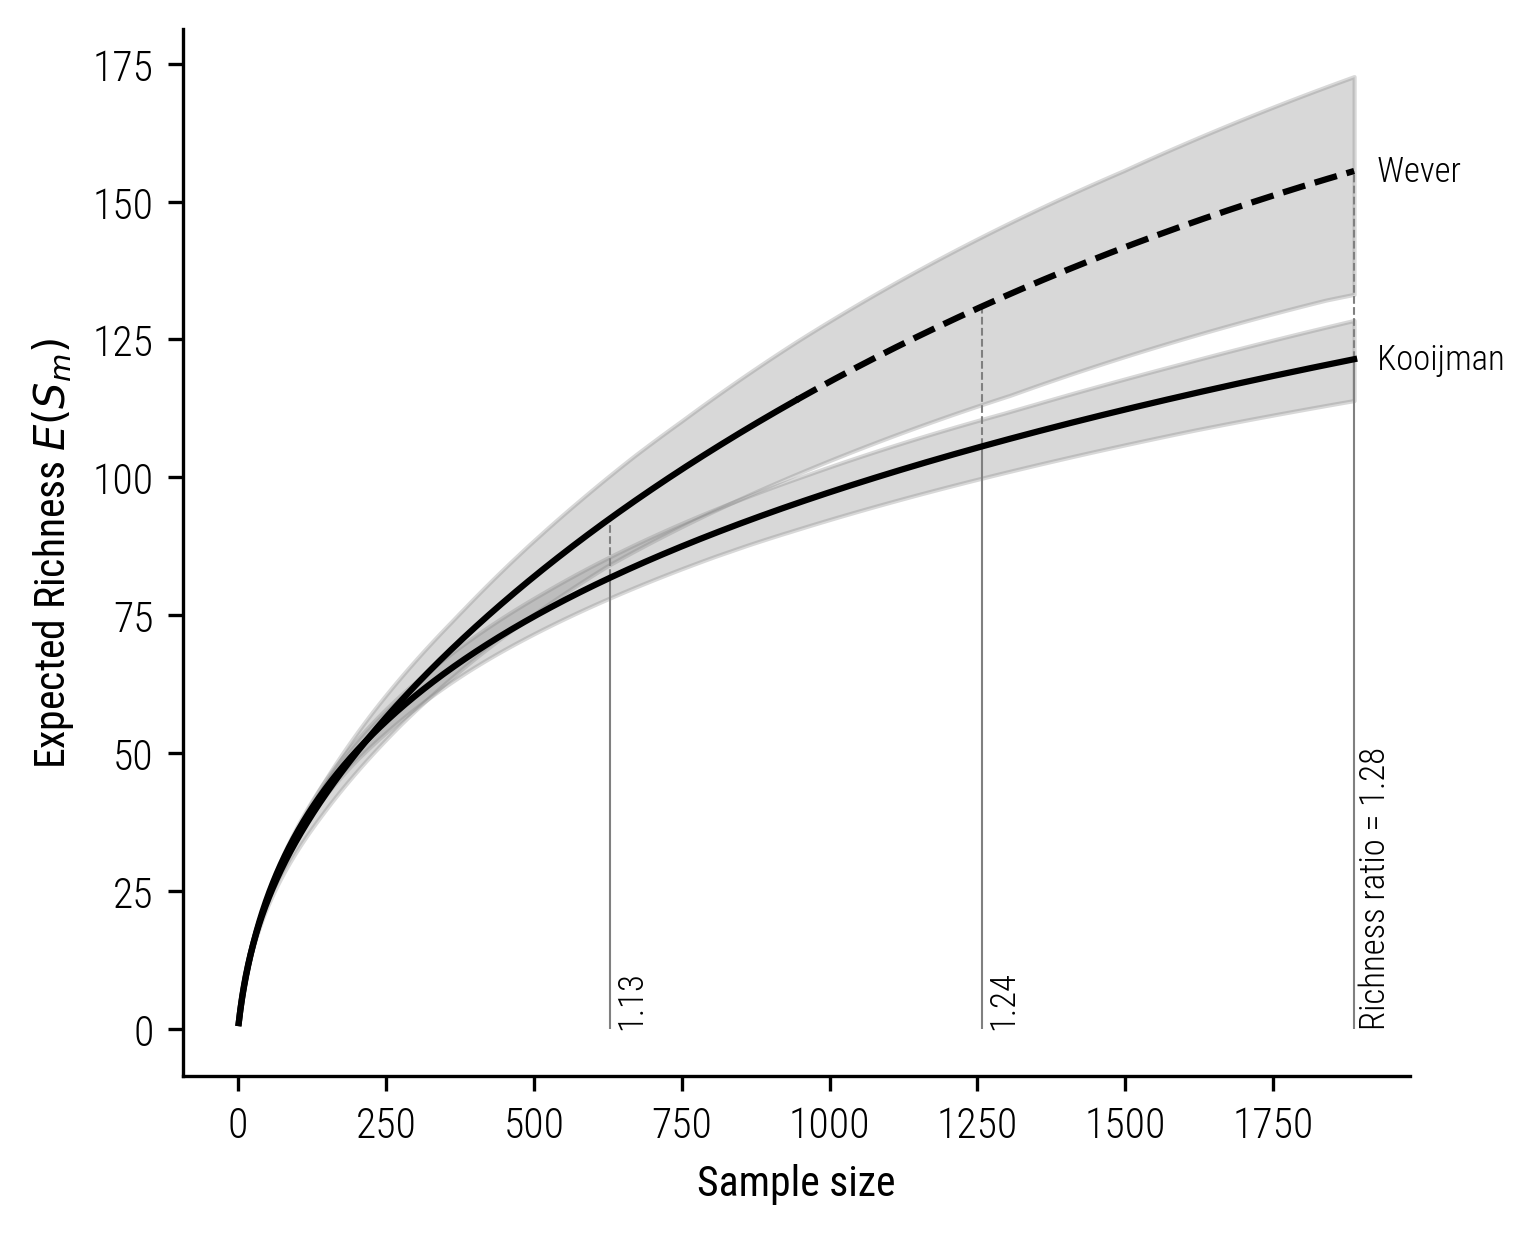 Figure 9: Size-based rarefaction-extrapolation curve for Kooijman and Wever.